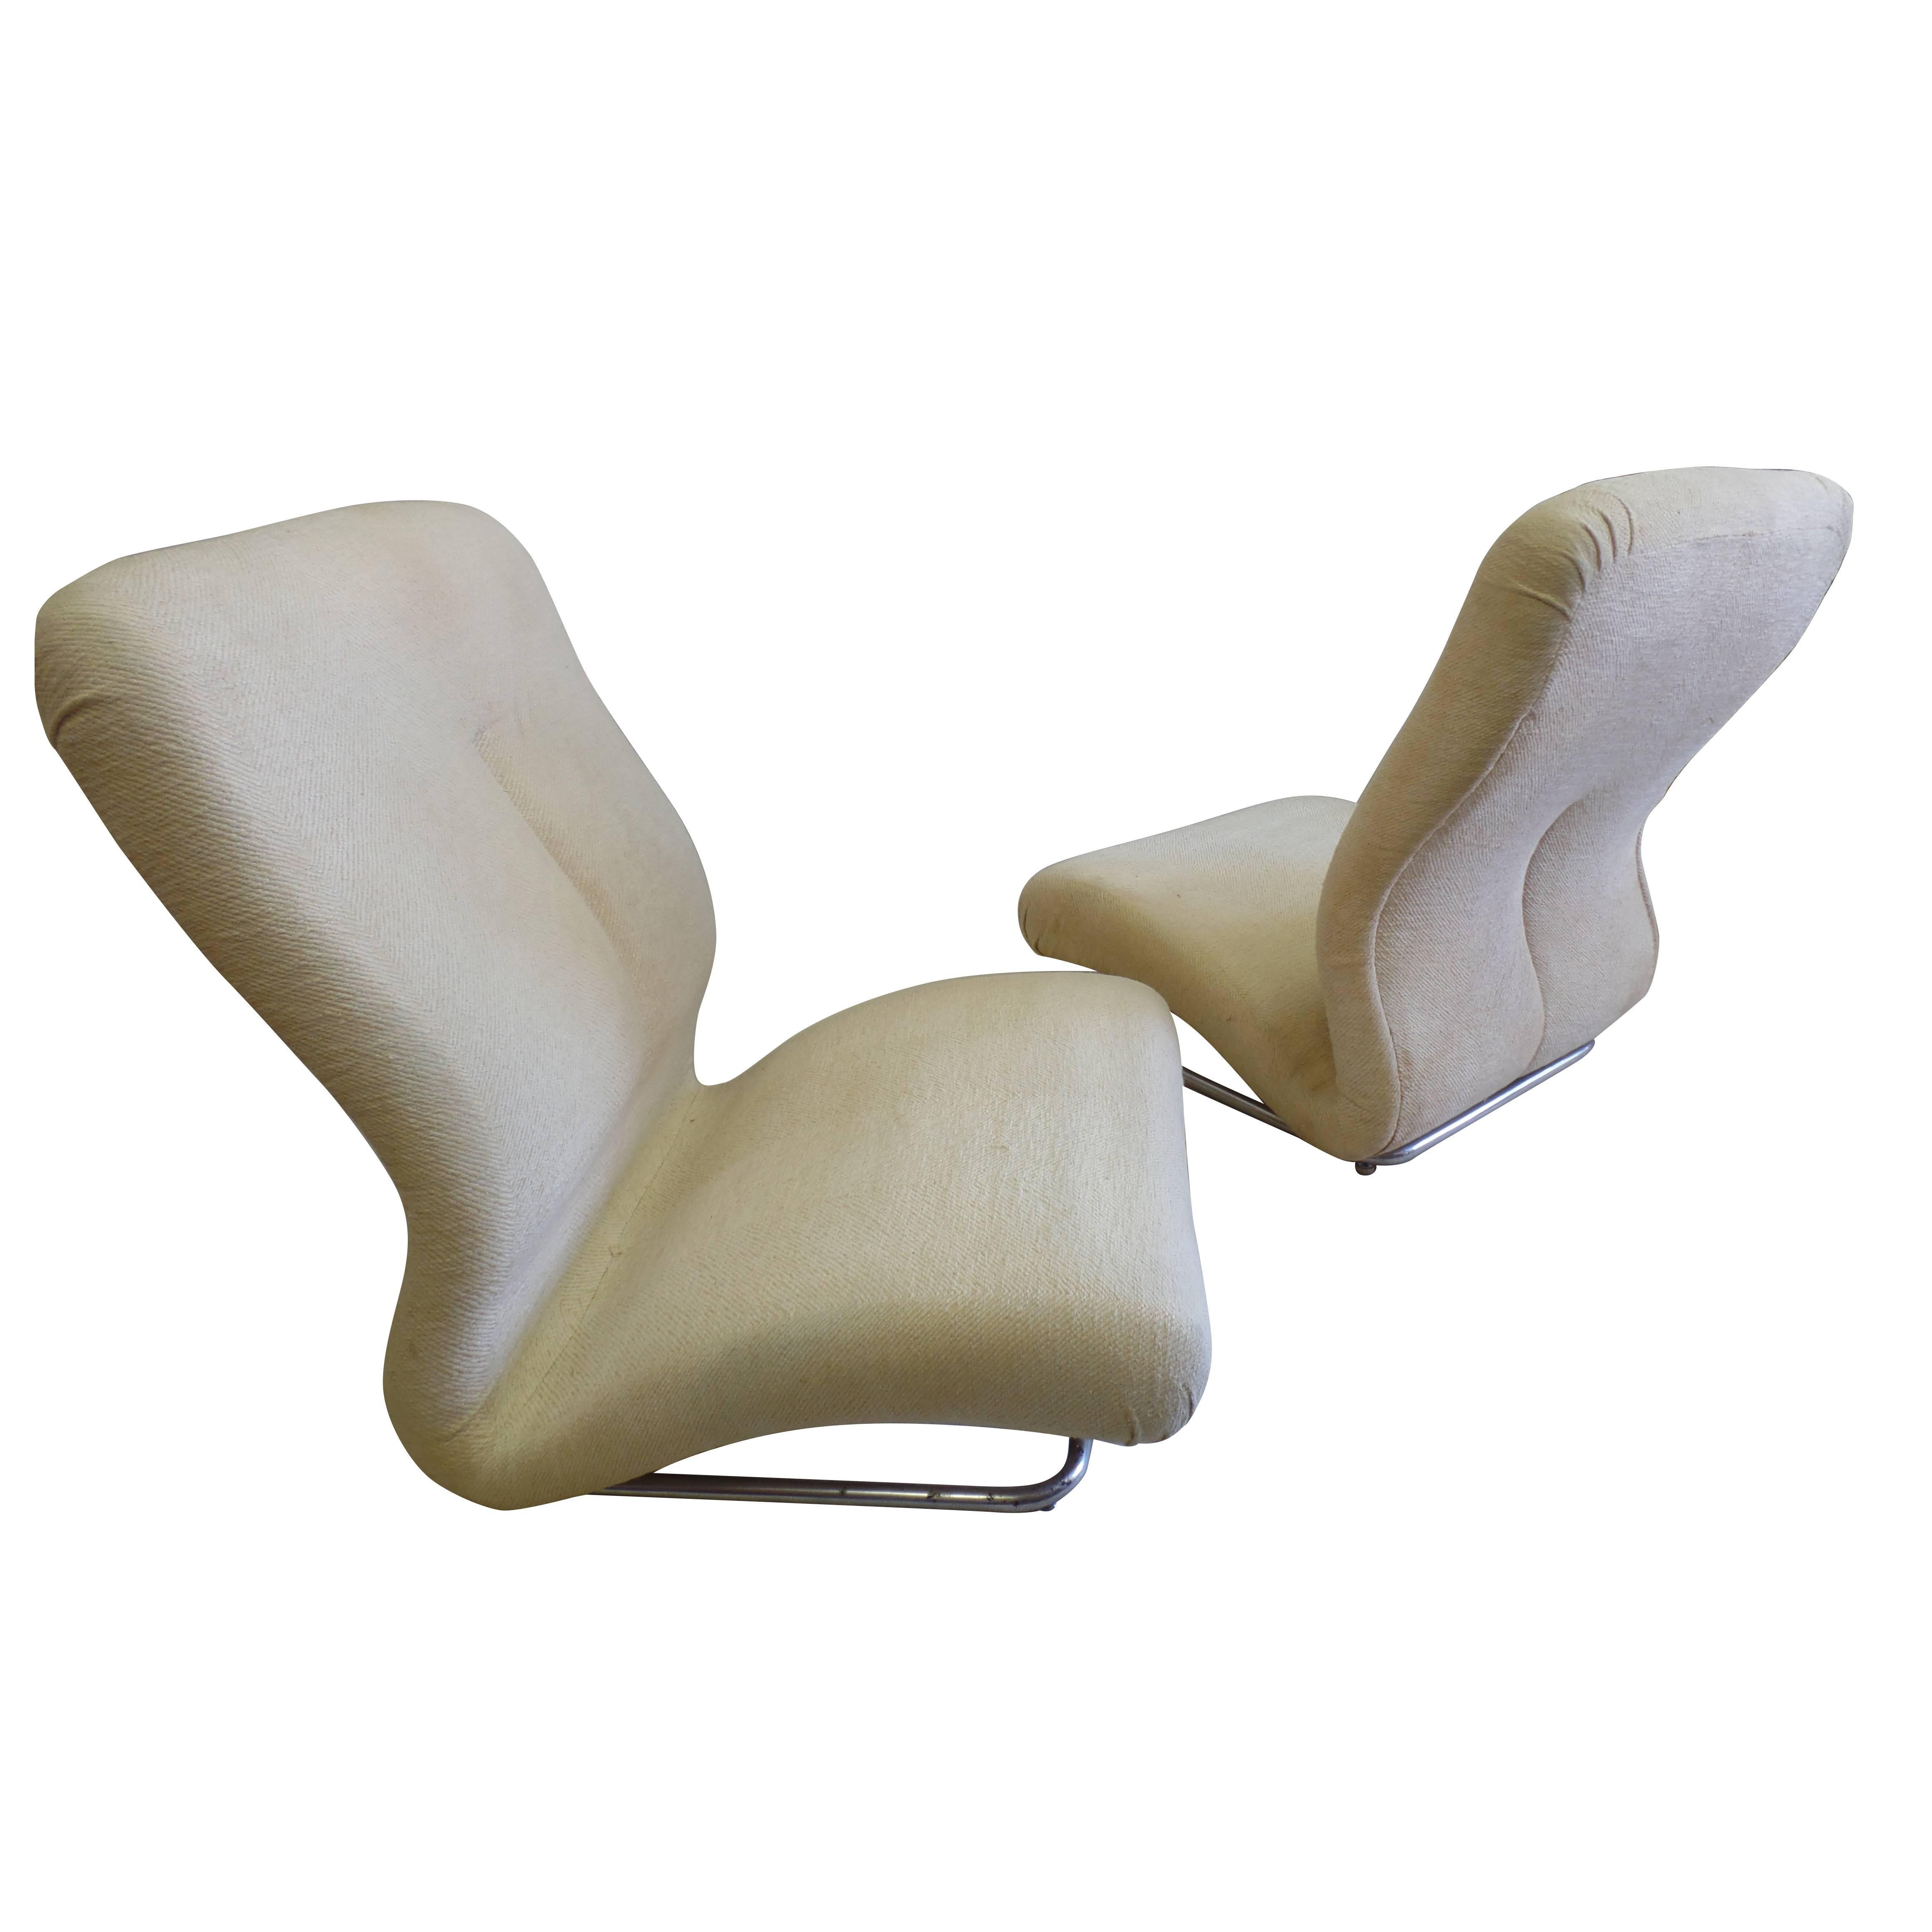 Rare Pair of Italian Mid-Century Modern / Space Age Lounge Chairs by IPE